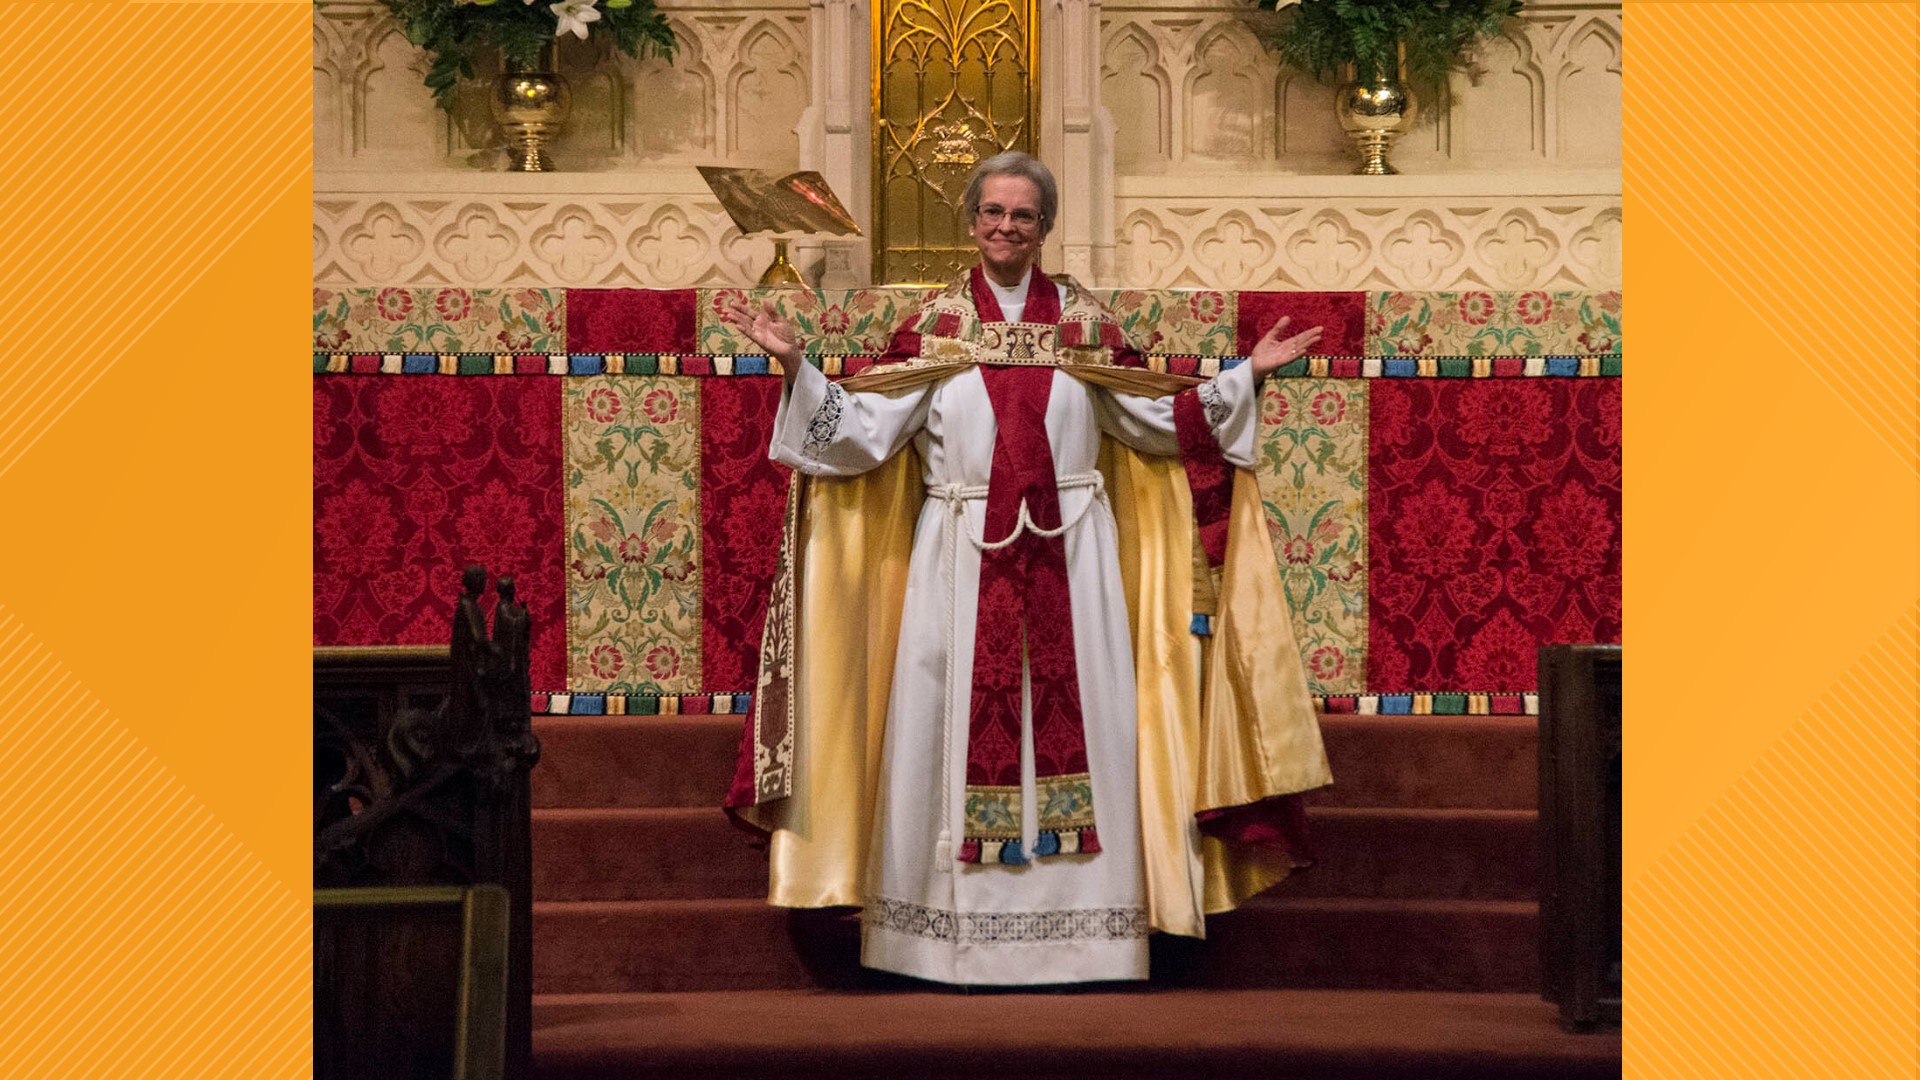 An East Aurora priest is lending her voice to a new Christmas song